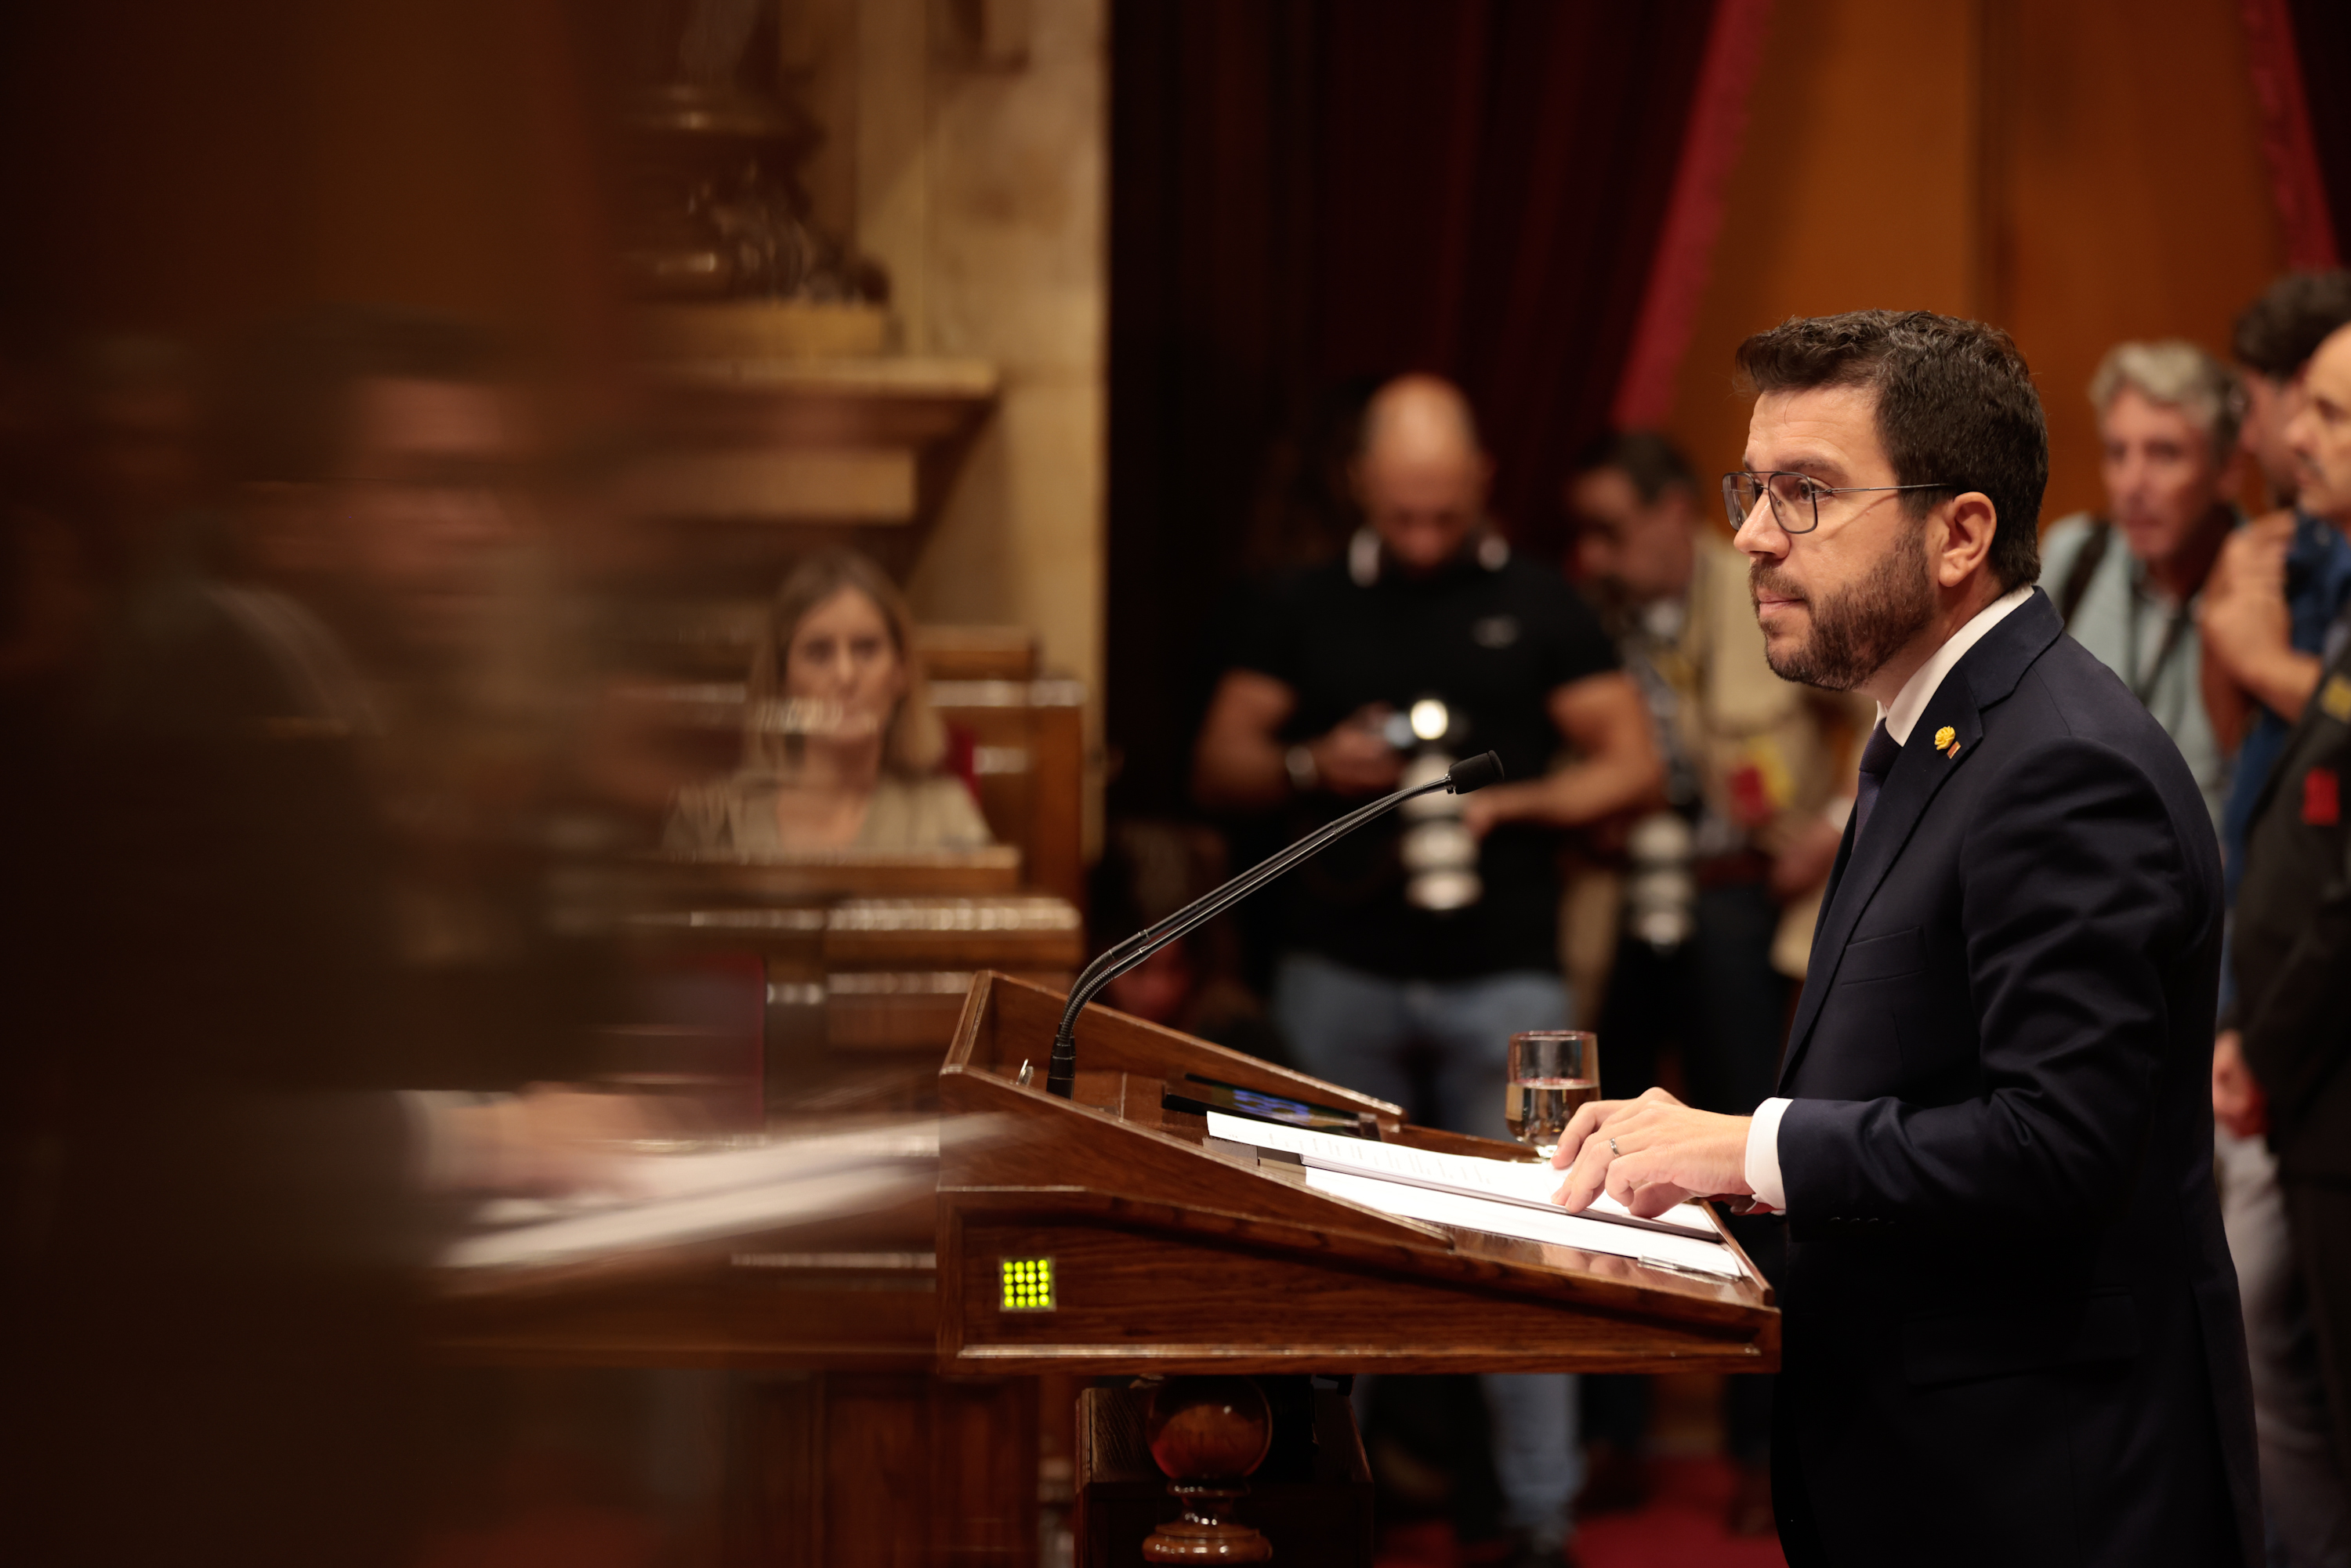 Catalan president Pere Aragonès speaks during his opening speech in the general policy debate on September 27, 2022 in the parliament